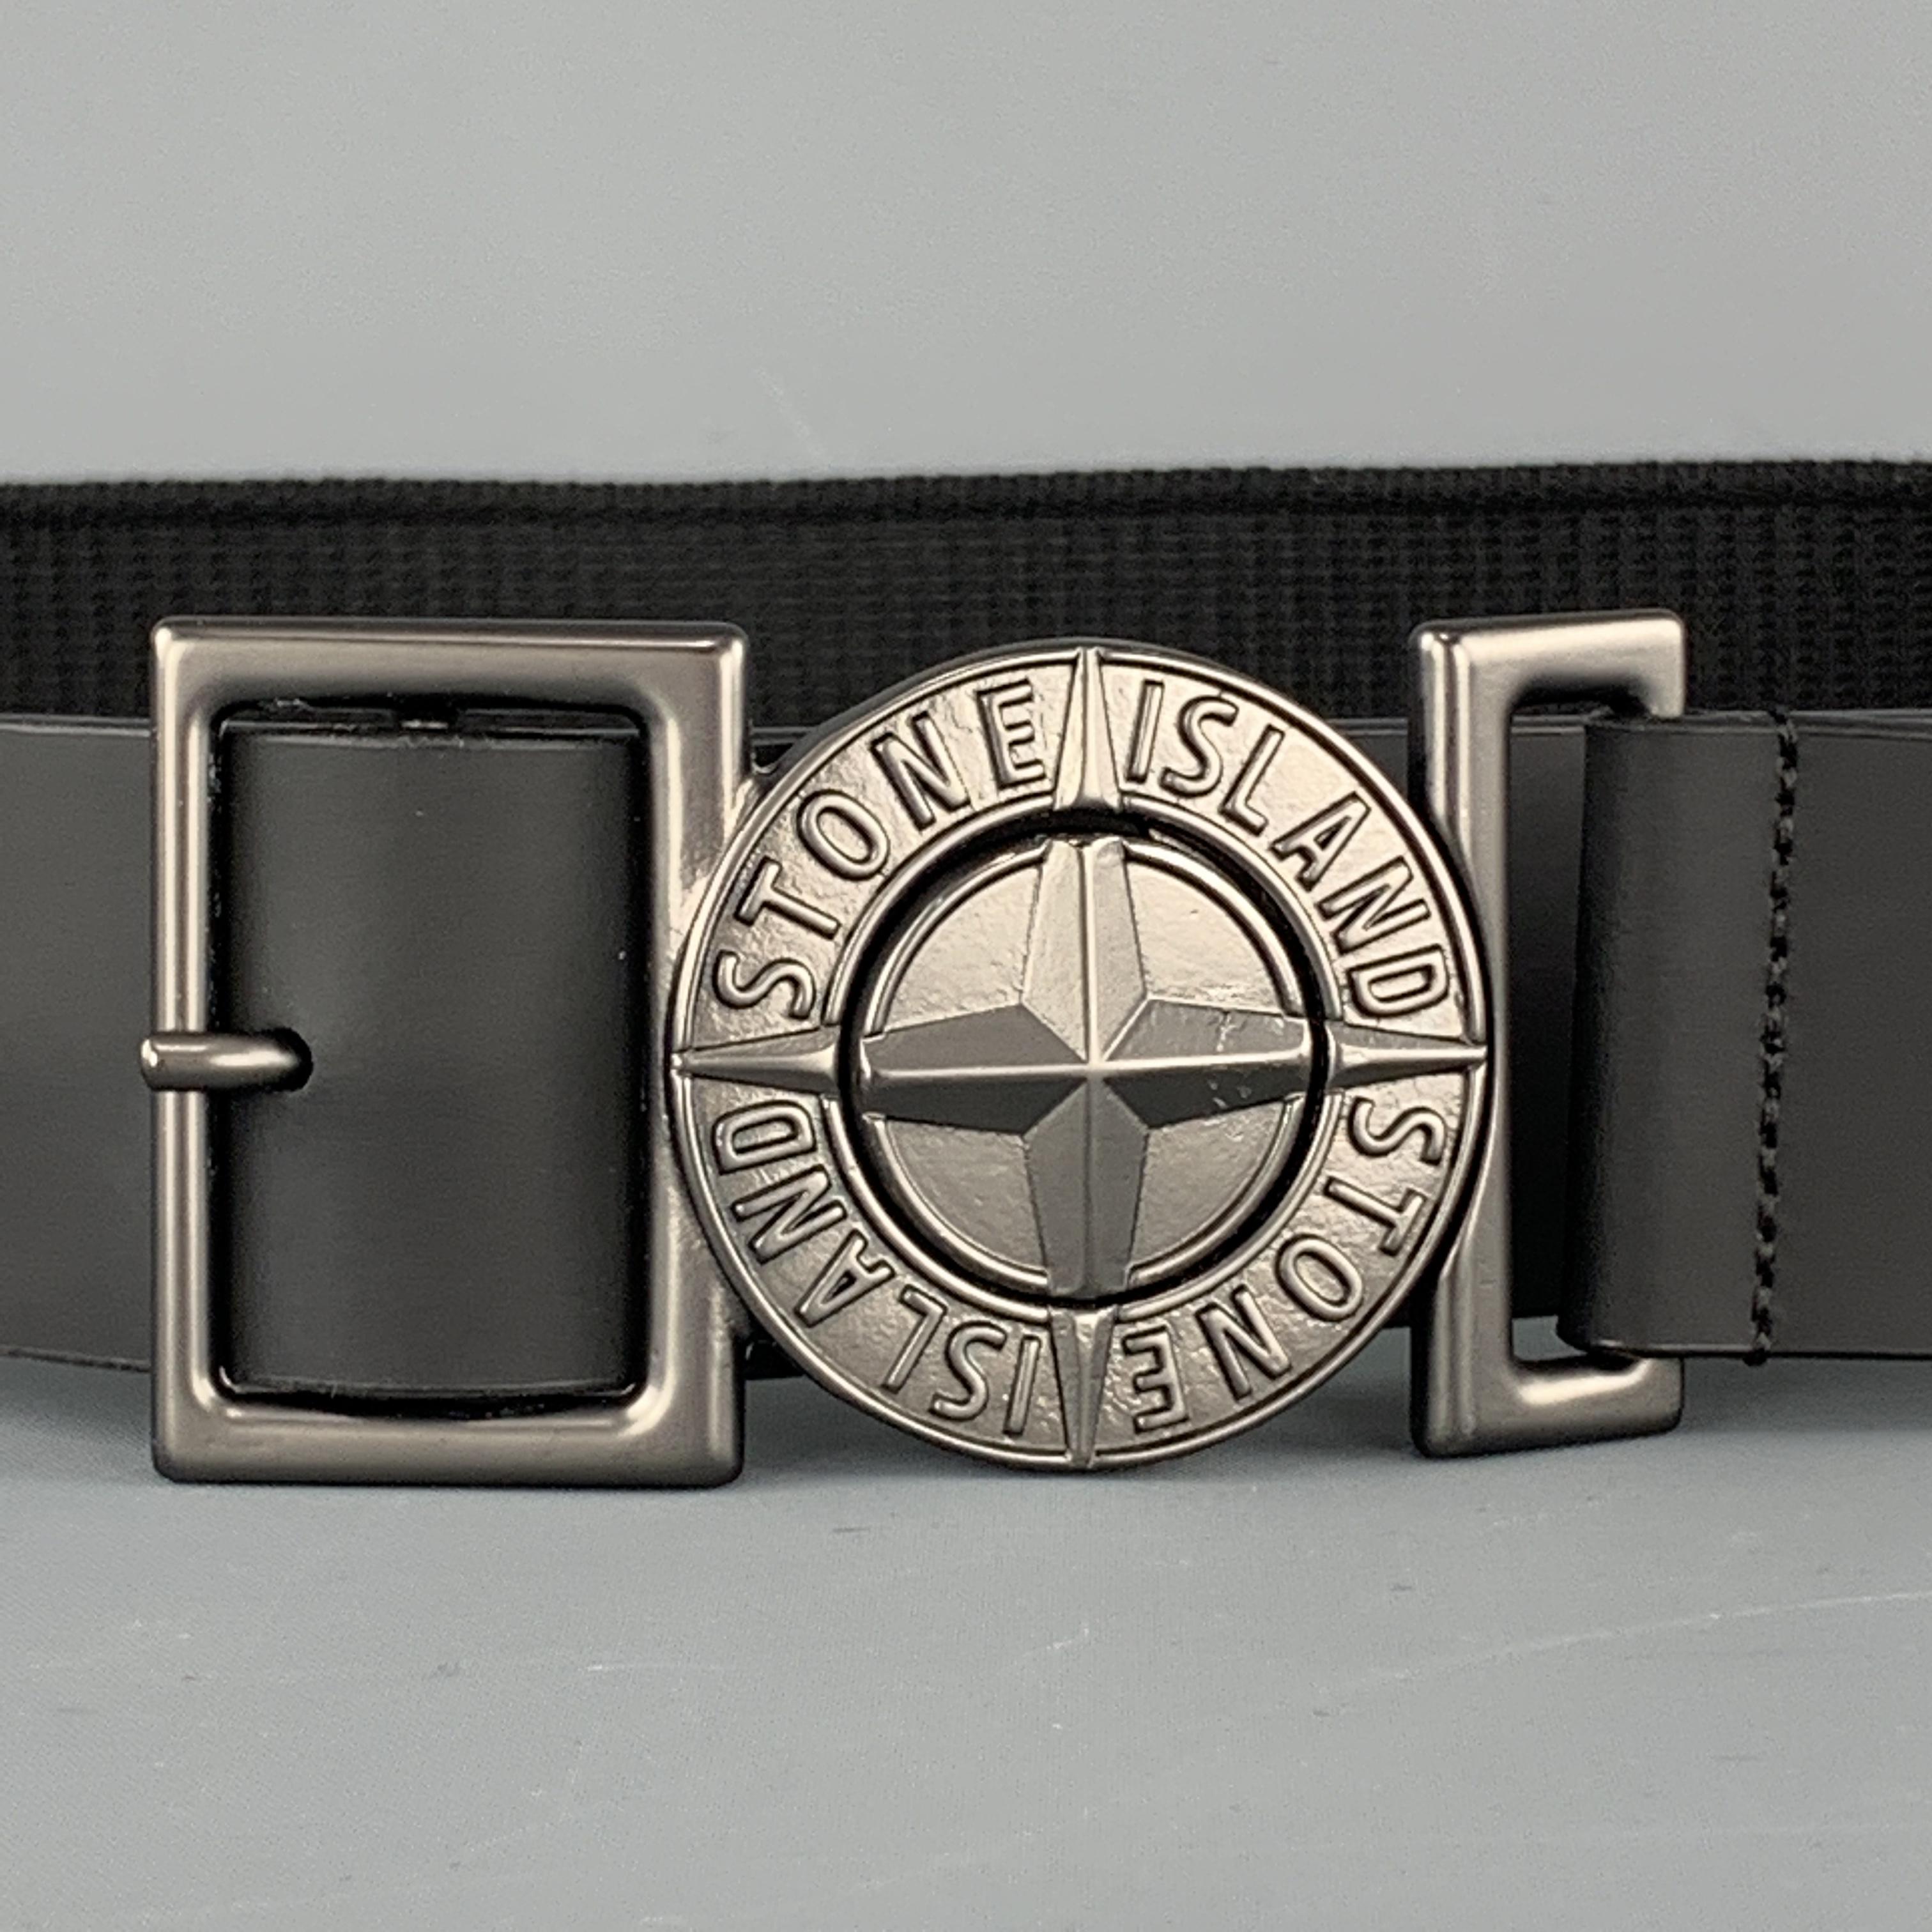 STONE ISLAND belt features a webbing strap with a logo interlock buckle detailed with adjustable rubbersized leather panels. Buckle scuffed. As-is. Made in Italy.

Very Good Pre-Owned Condition.
Marked: 100

Length: 43.5 in.
Width: 1.5 in.
Fits: